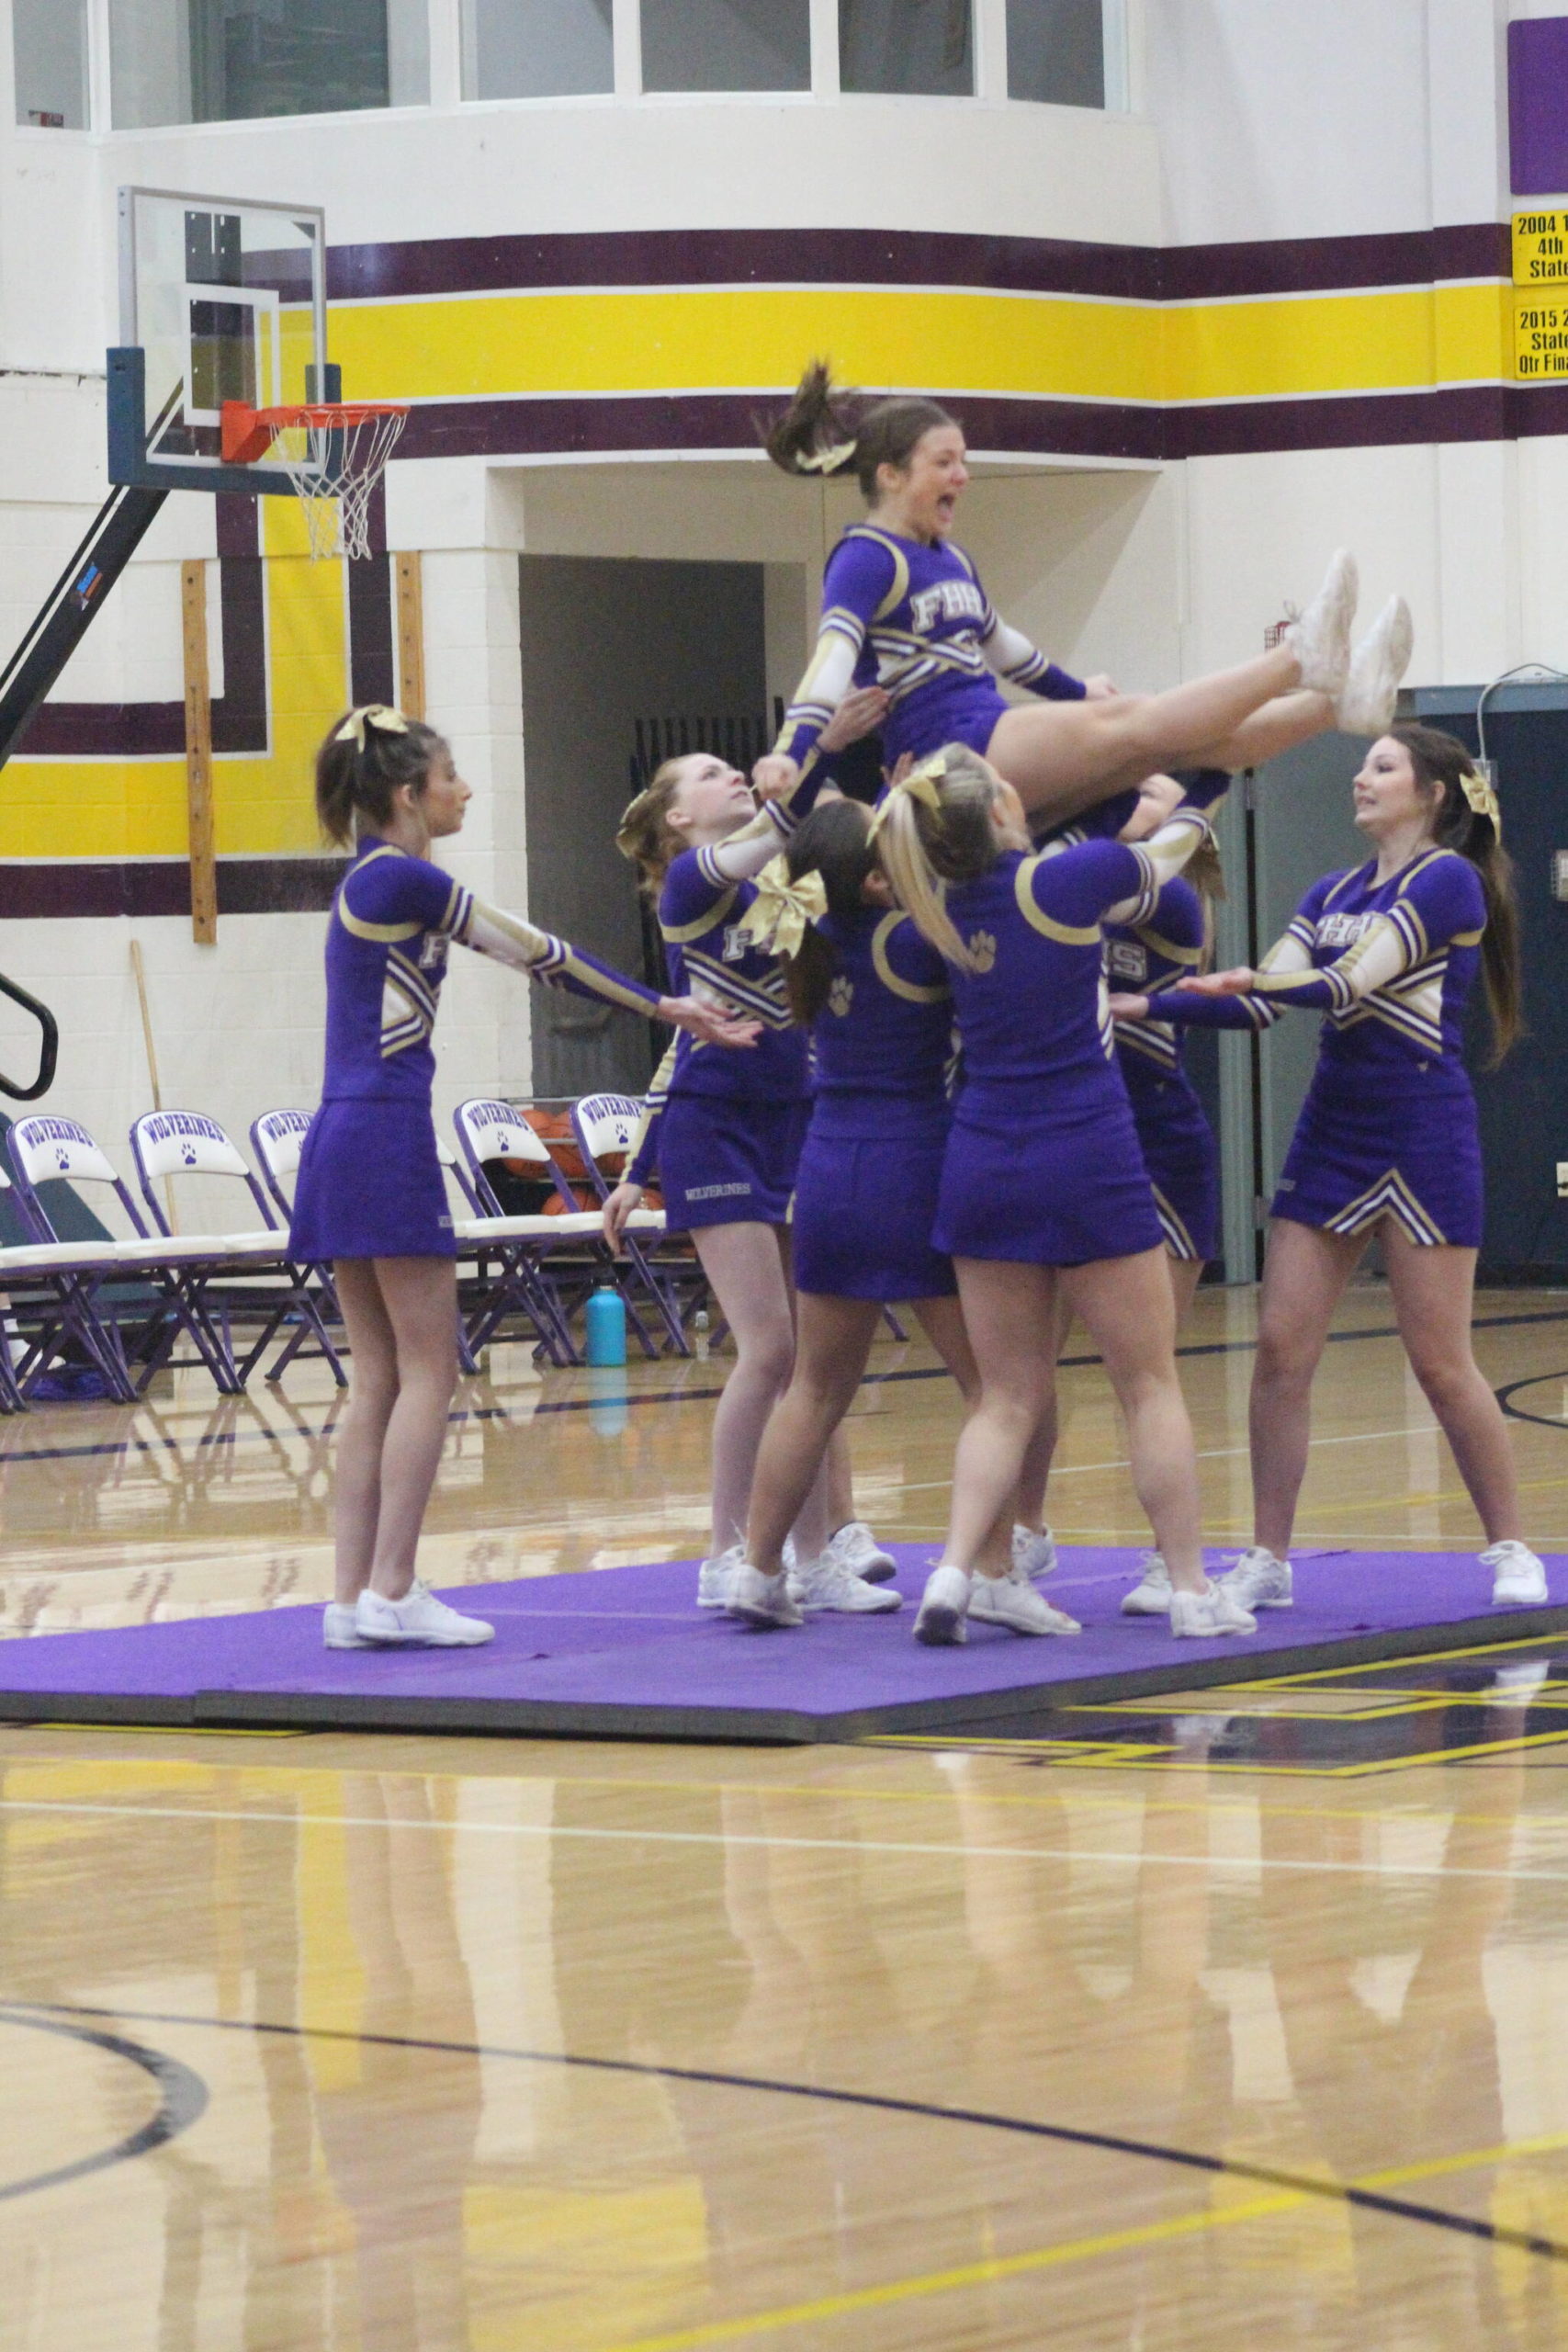 Heather Spaulding \ Staff photo
Wolverine Cheer Squad brings on the gymnastics during half-time